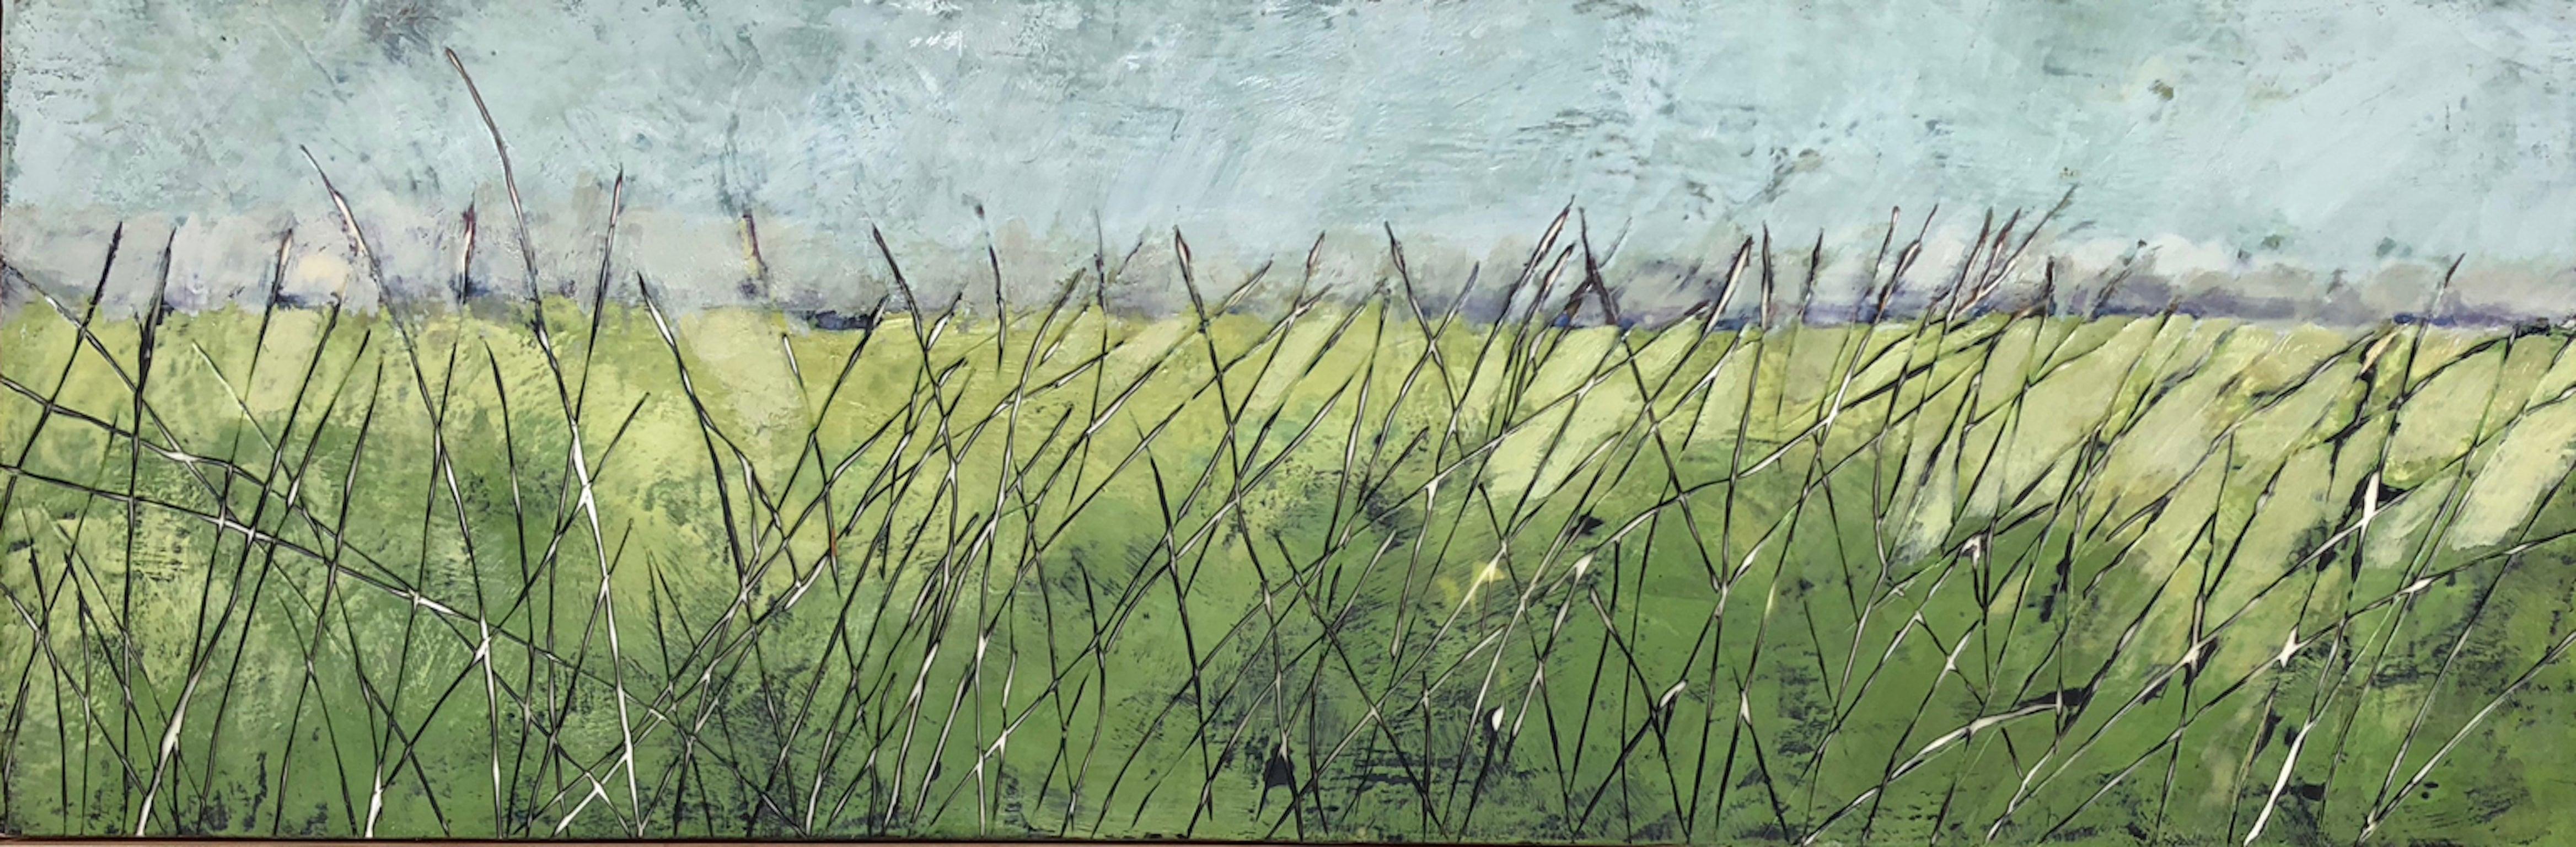 Sylvia Torres Landscape Painting - Green Fields